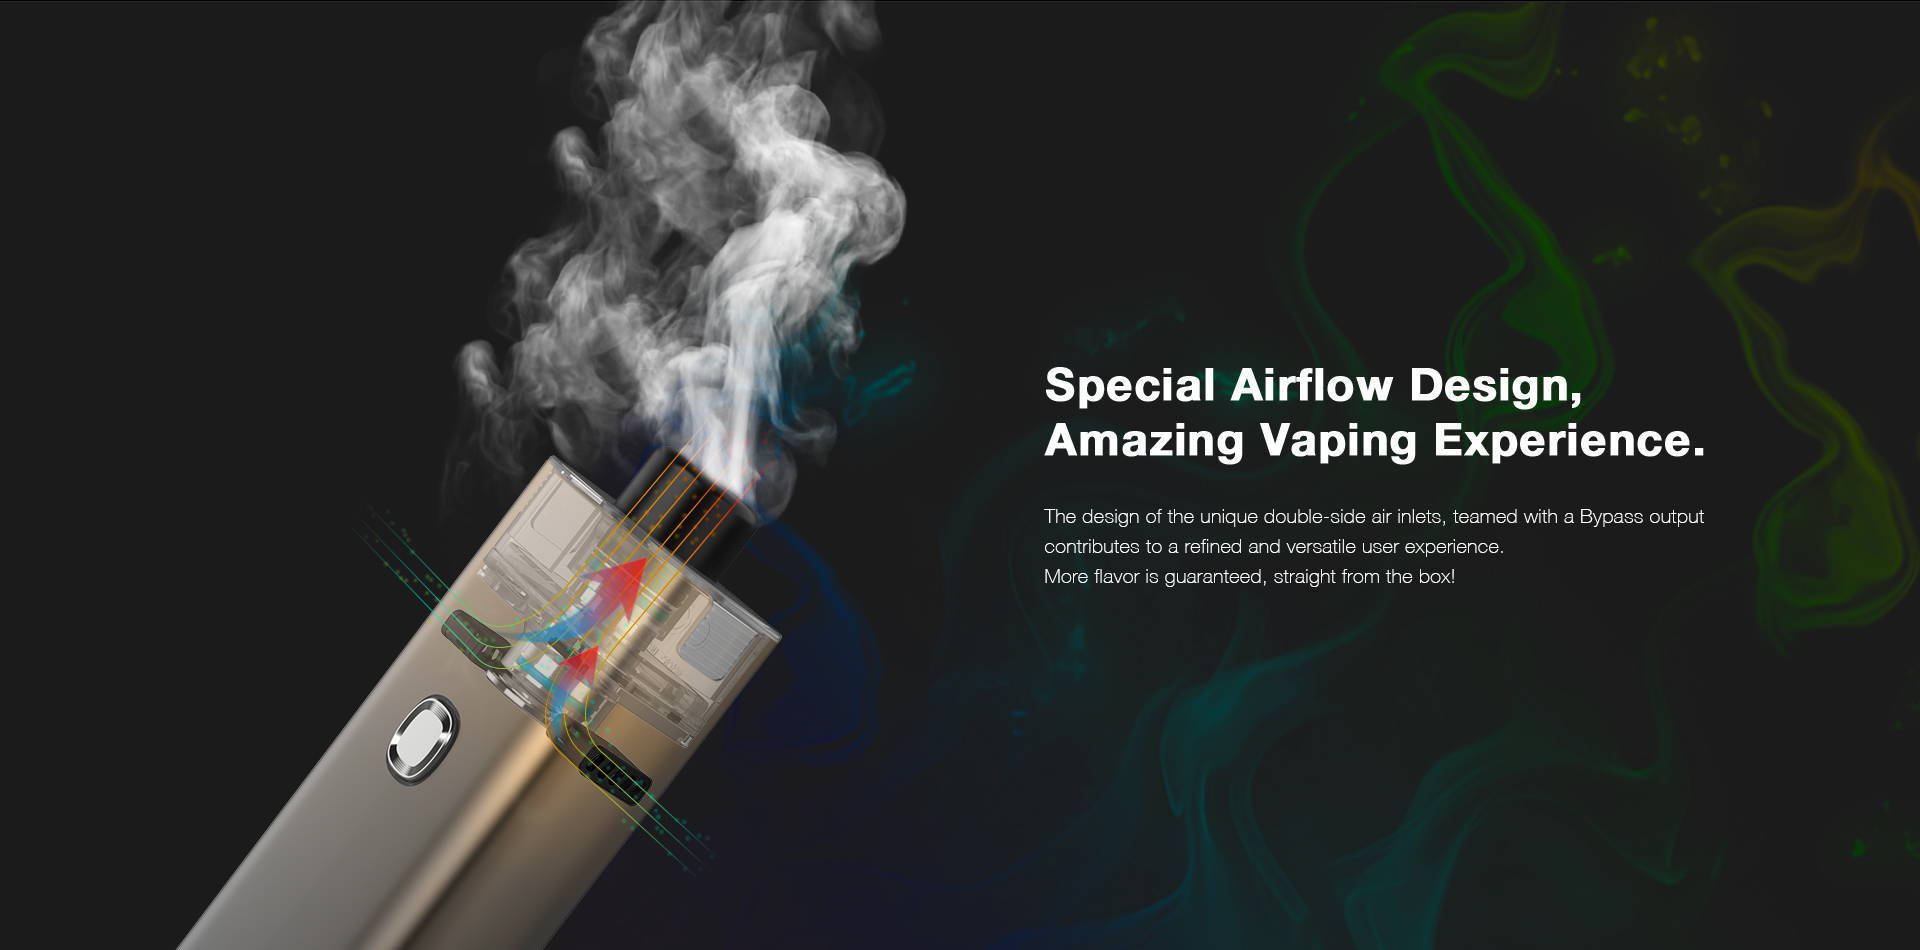 The design of the unique double-side air inlets, teamed with Bypass output,  contributes to a refined and versatile user experience.  More flavor is guaranteed, straight from the kit box!